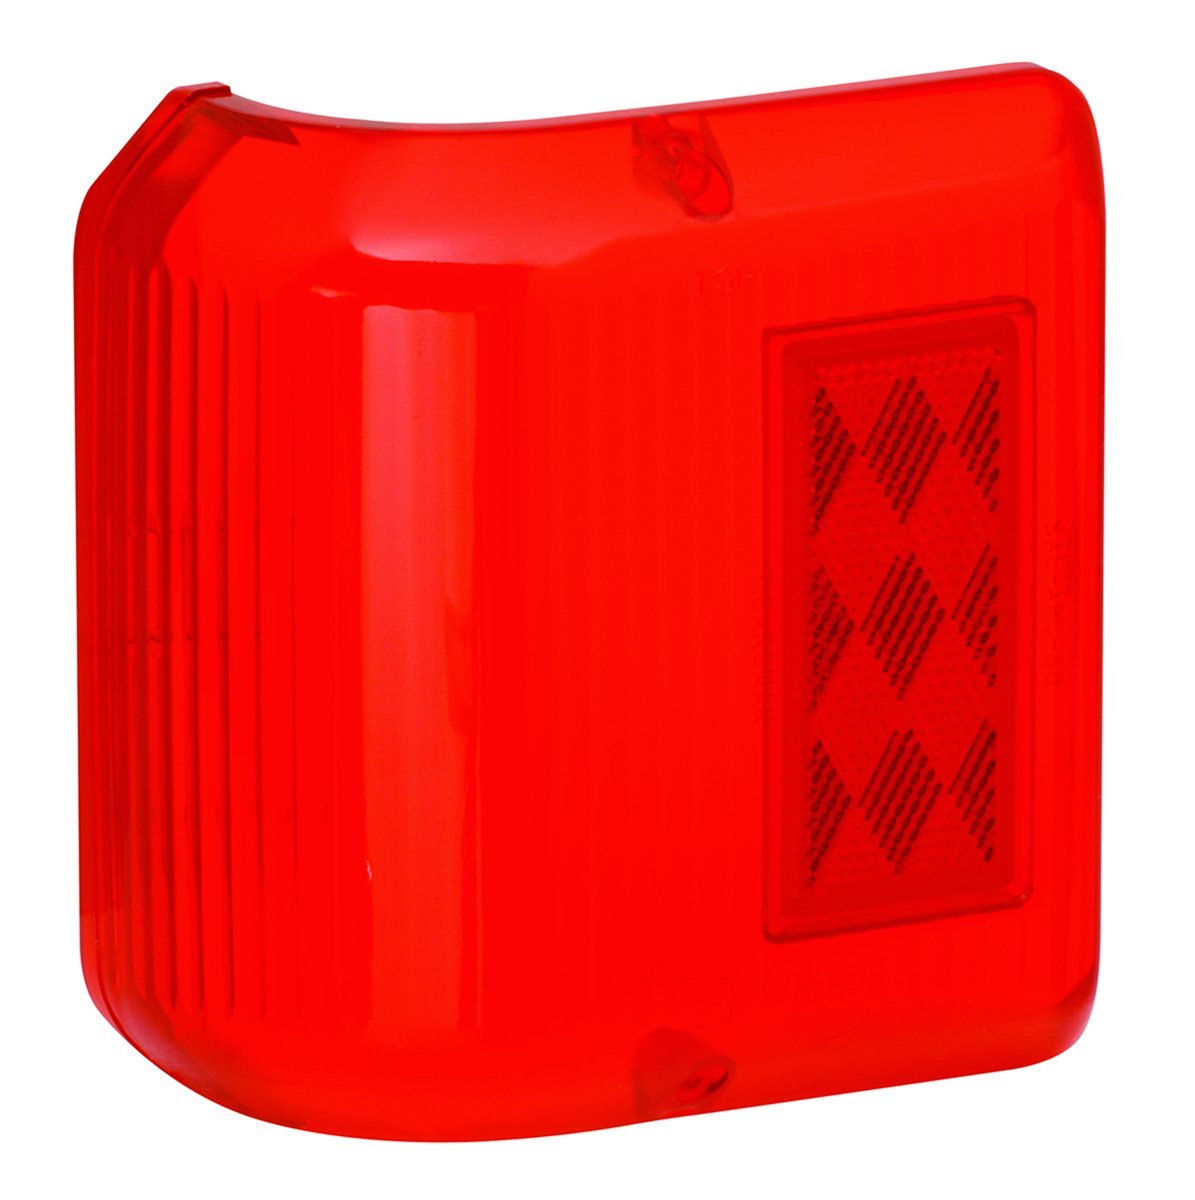 Bargman 34-86-711 Replacement Lens for Bargman 86 Series Wraparound Clearance Side Marker Lights - Red